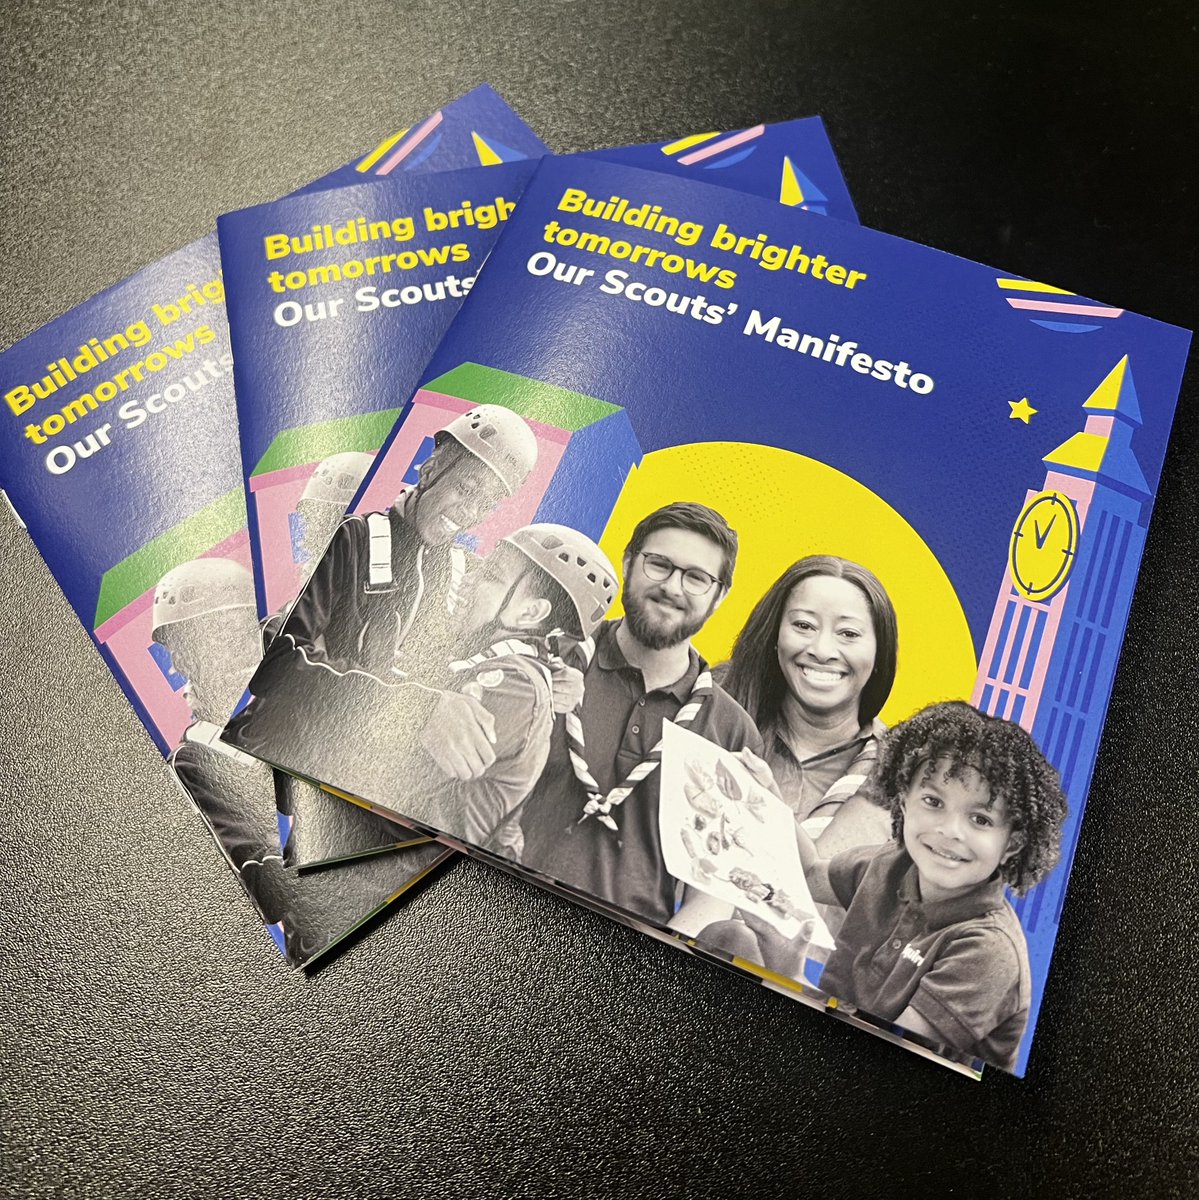 Our Scouts' Manifesto booklet is looking amazing!

I'm incredibly proud of the collective effort put forth by our young people, volunteers, policy and wider design team... and this is just the beginning!

scouts.org.uk/about-us/our-c…

#BuildingBrighterTomorrows